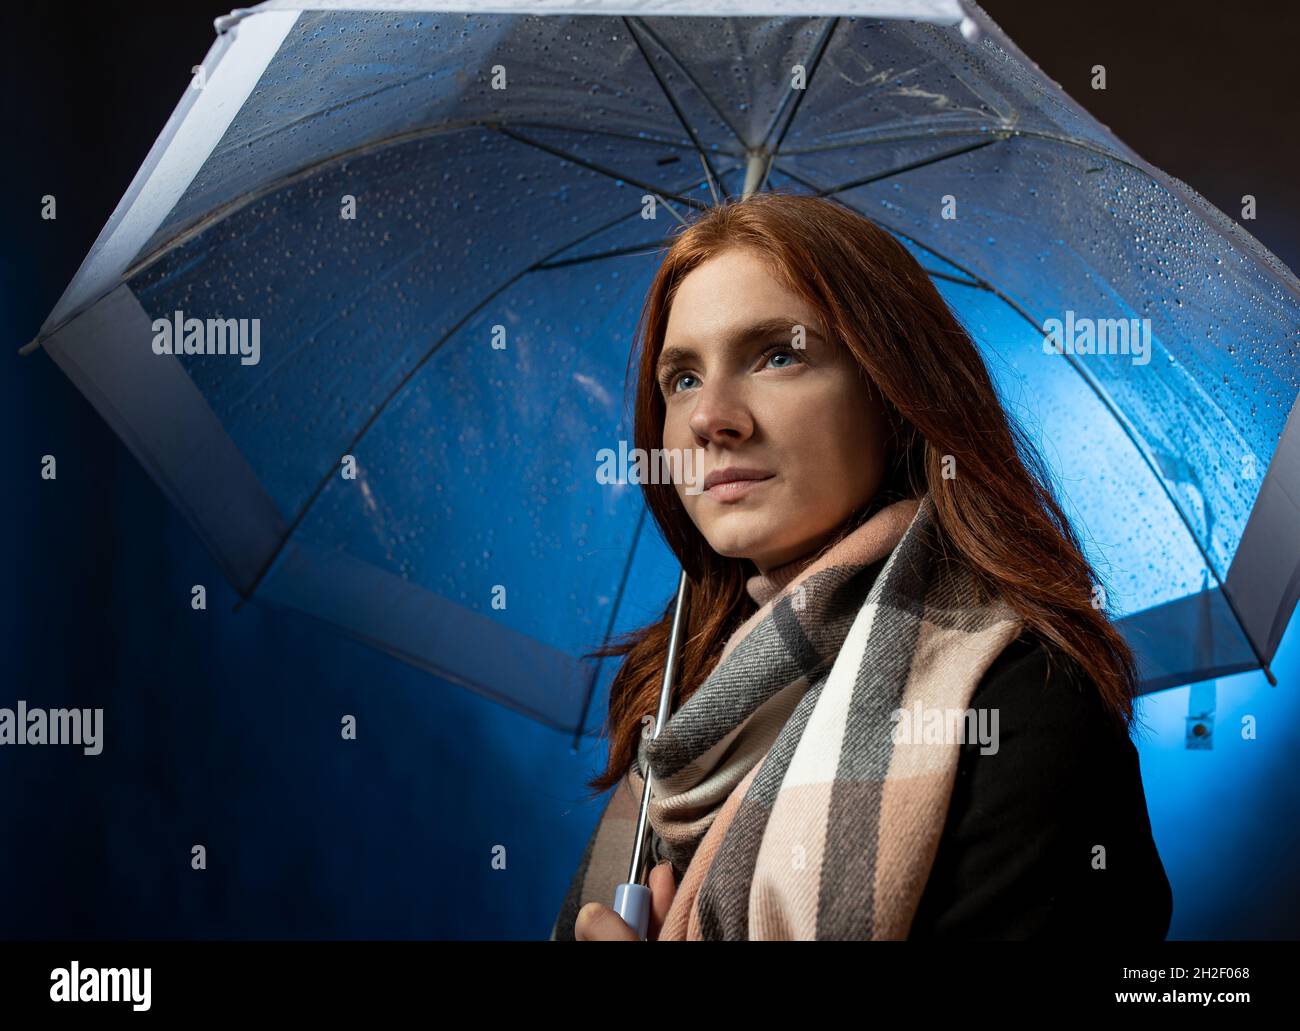 Portrait of beautiful red hair girl with blue eyes standing under transparent umbrella at night Stock Photo